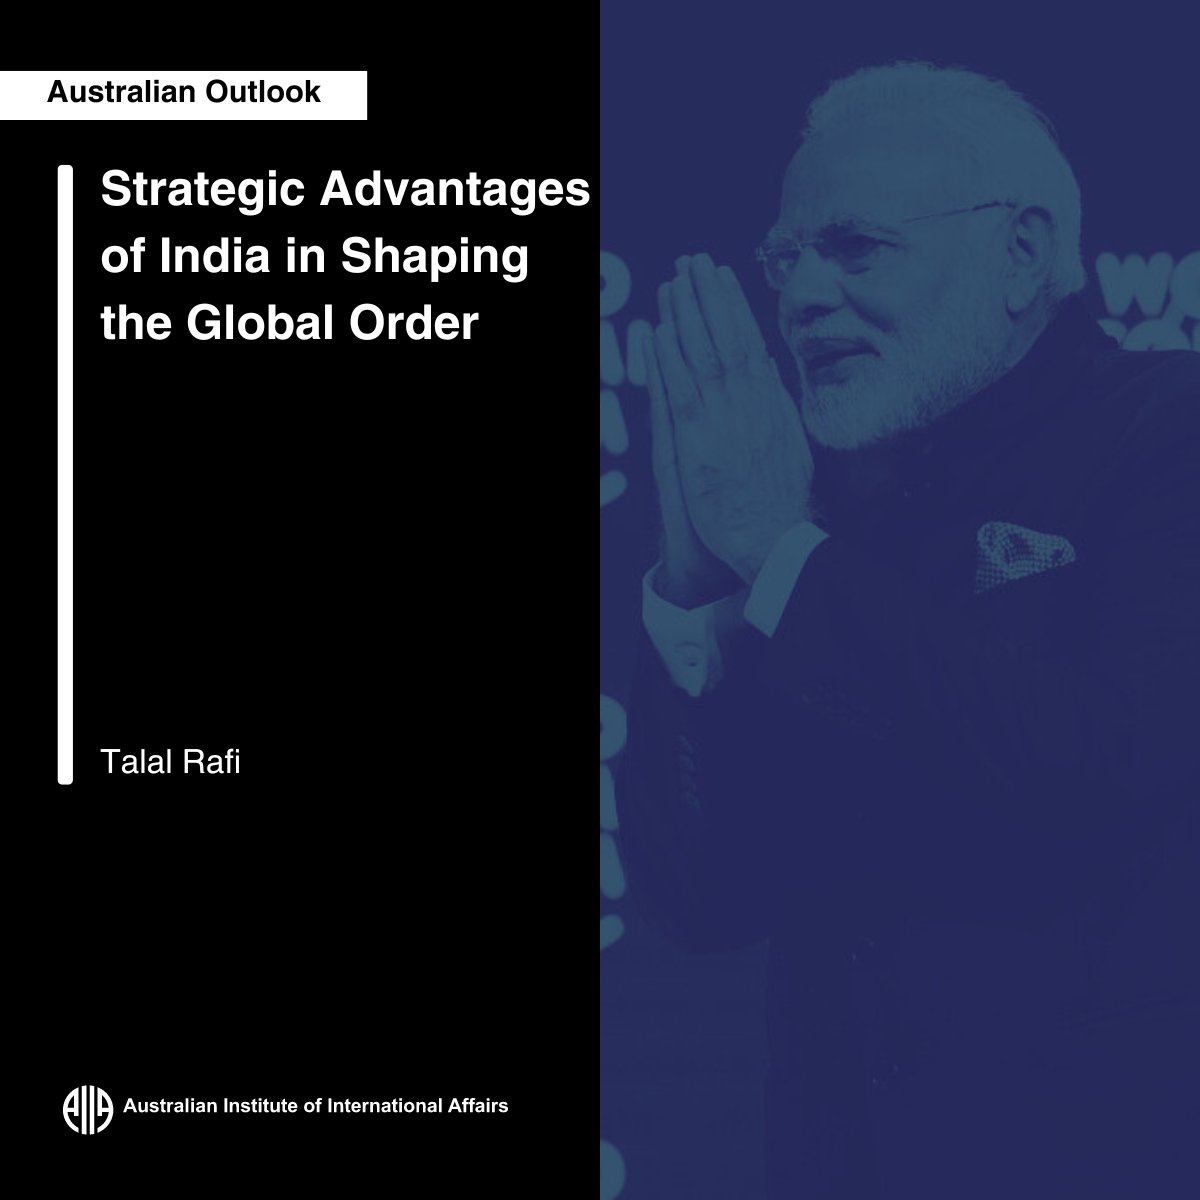 “Having chaired the recent G20 summit successfully, and as a member of...BRICS and Quad, India is strategically placed to play a crucial role in geopolitics,” discussed by Talal Rafi Read more at Australian Outlook👇 ow.ly/NXIo50RhMu8